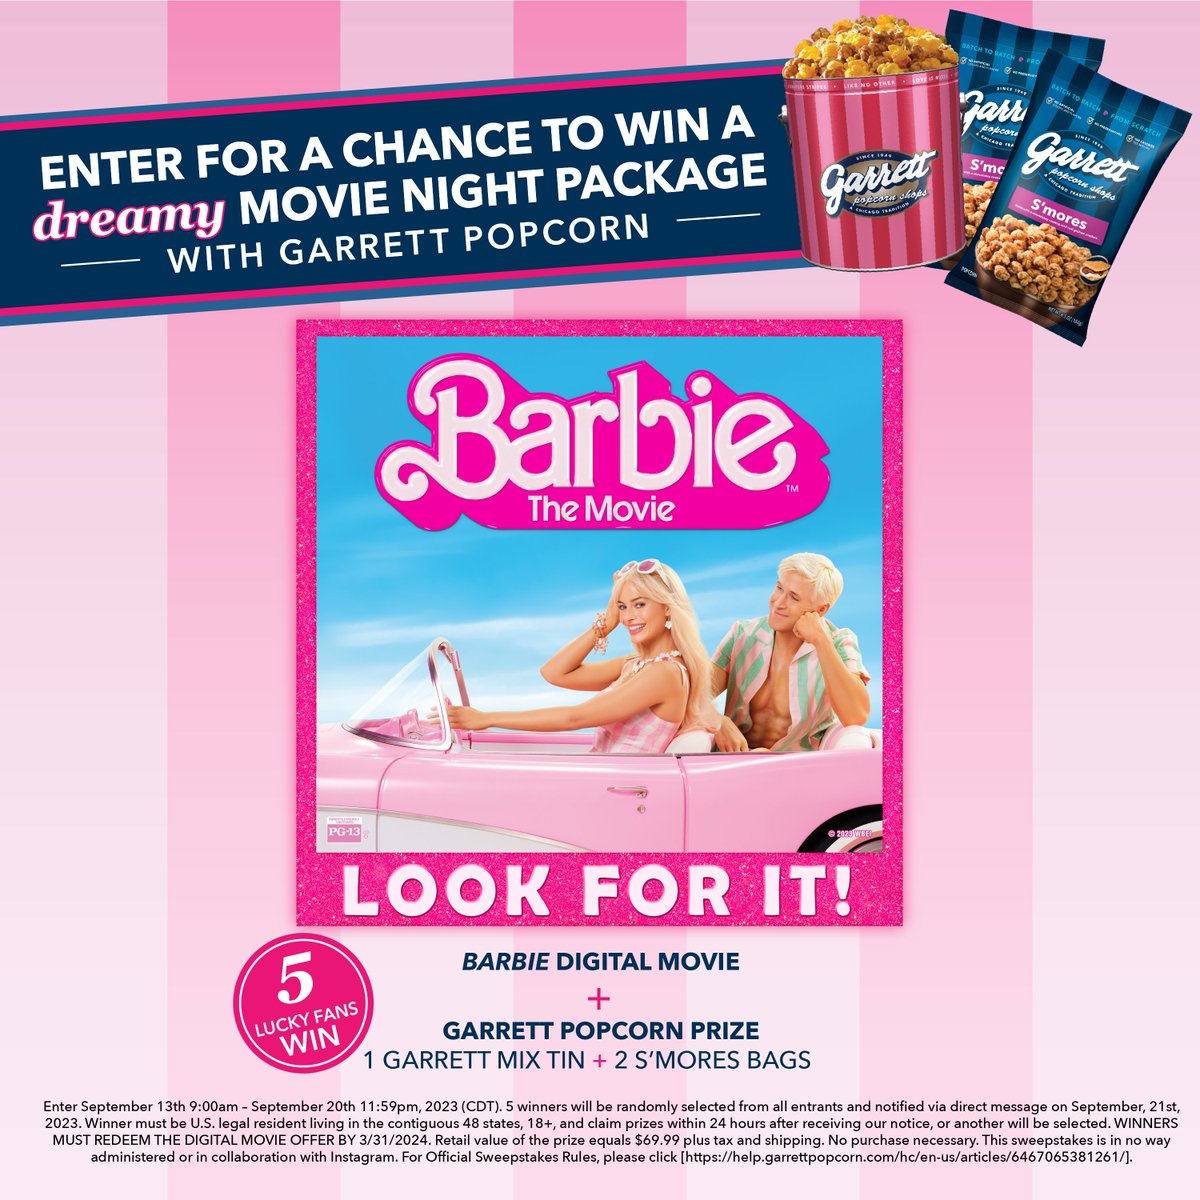 💖 A SWEEPSTAKES for popcorn and @BarbieTheMovie 💖 Enter for a chance to win a dreamy movie night package with the Barbie digital movie and Garrett Popcorn! 🎉 Head over to @garrettpopcorn on Instagram for your chance to win: bit.ly/48pJtgm